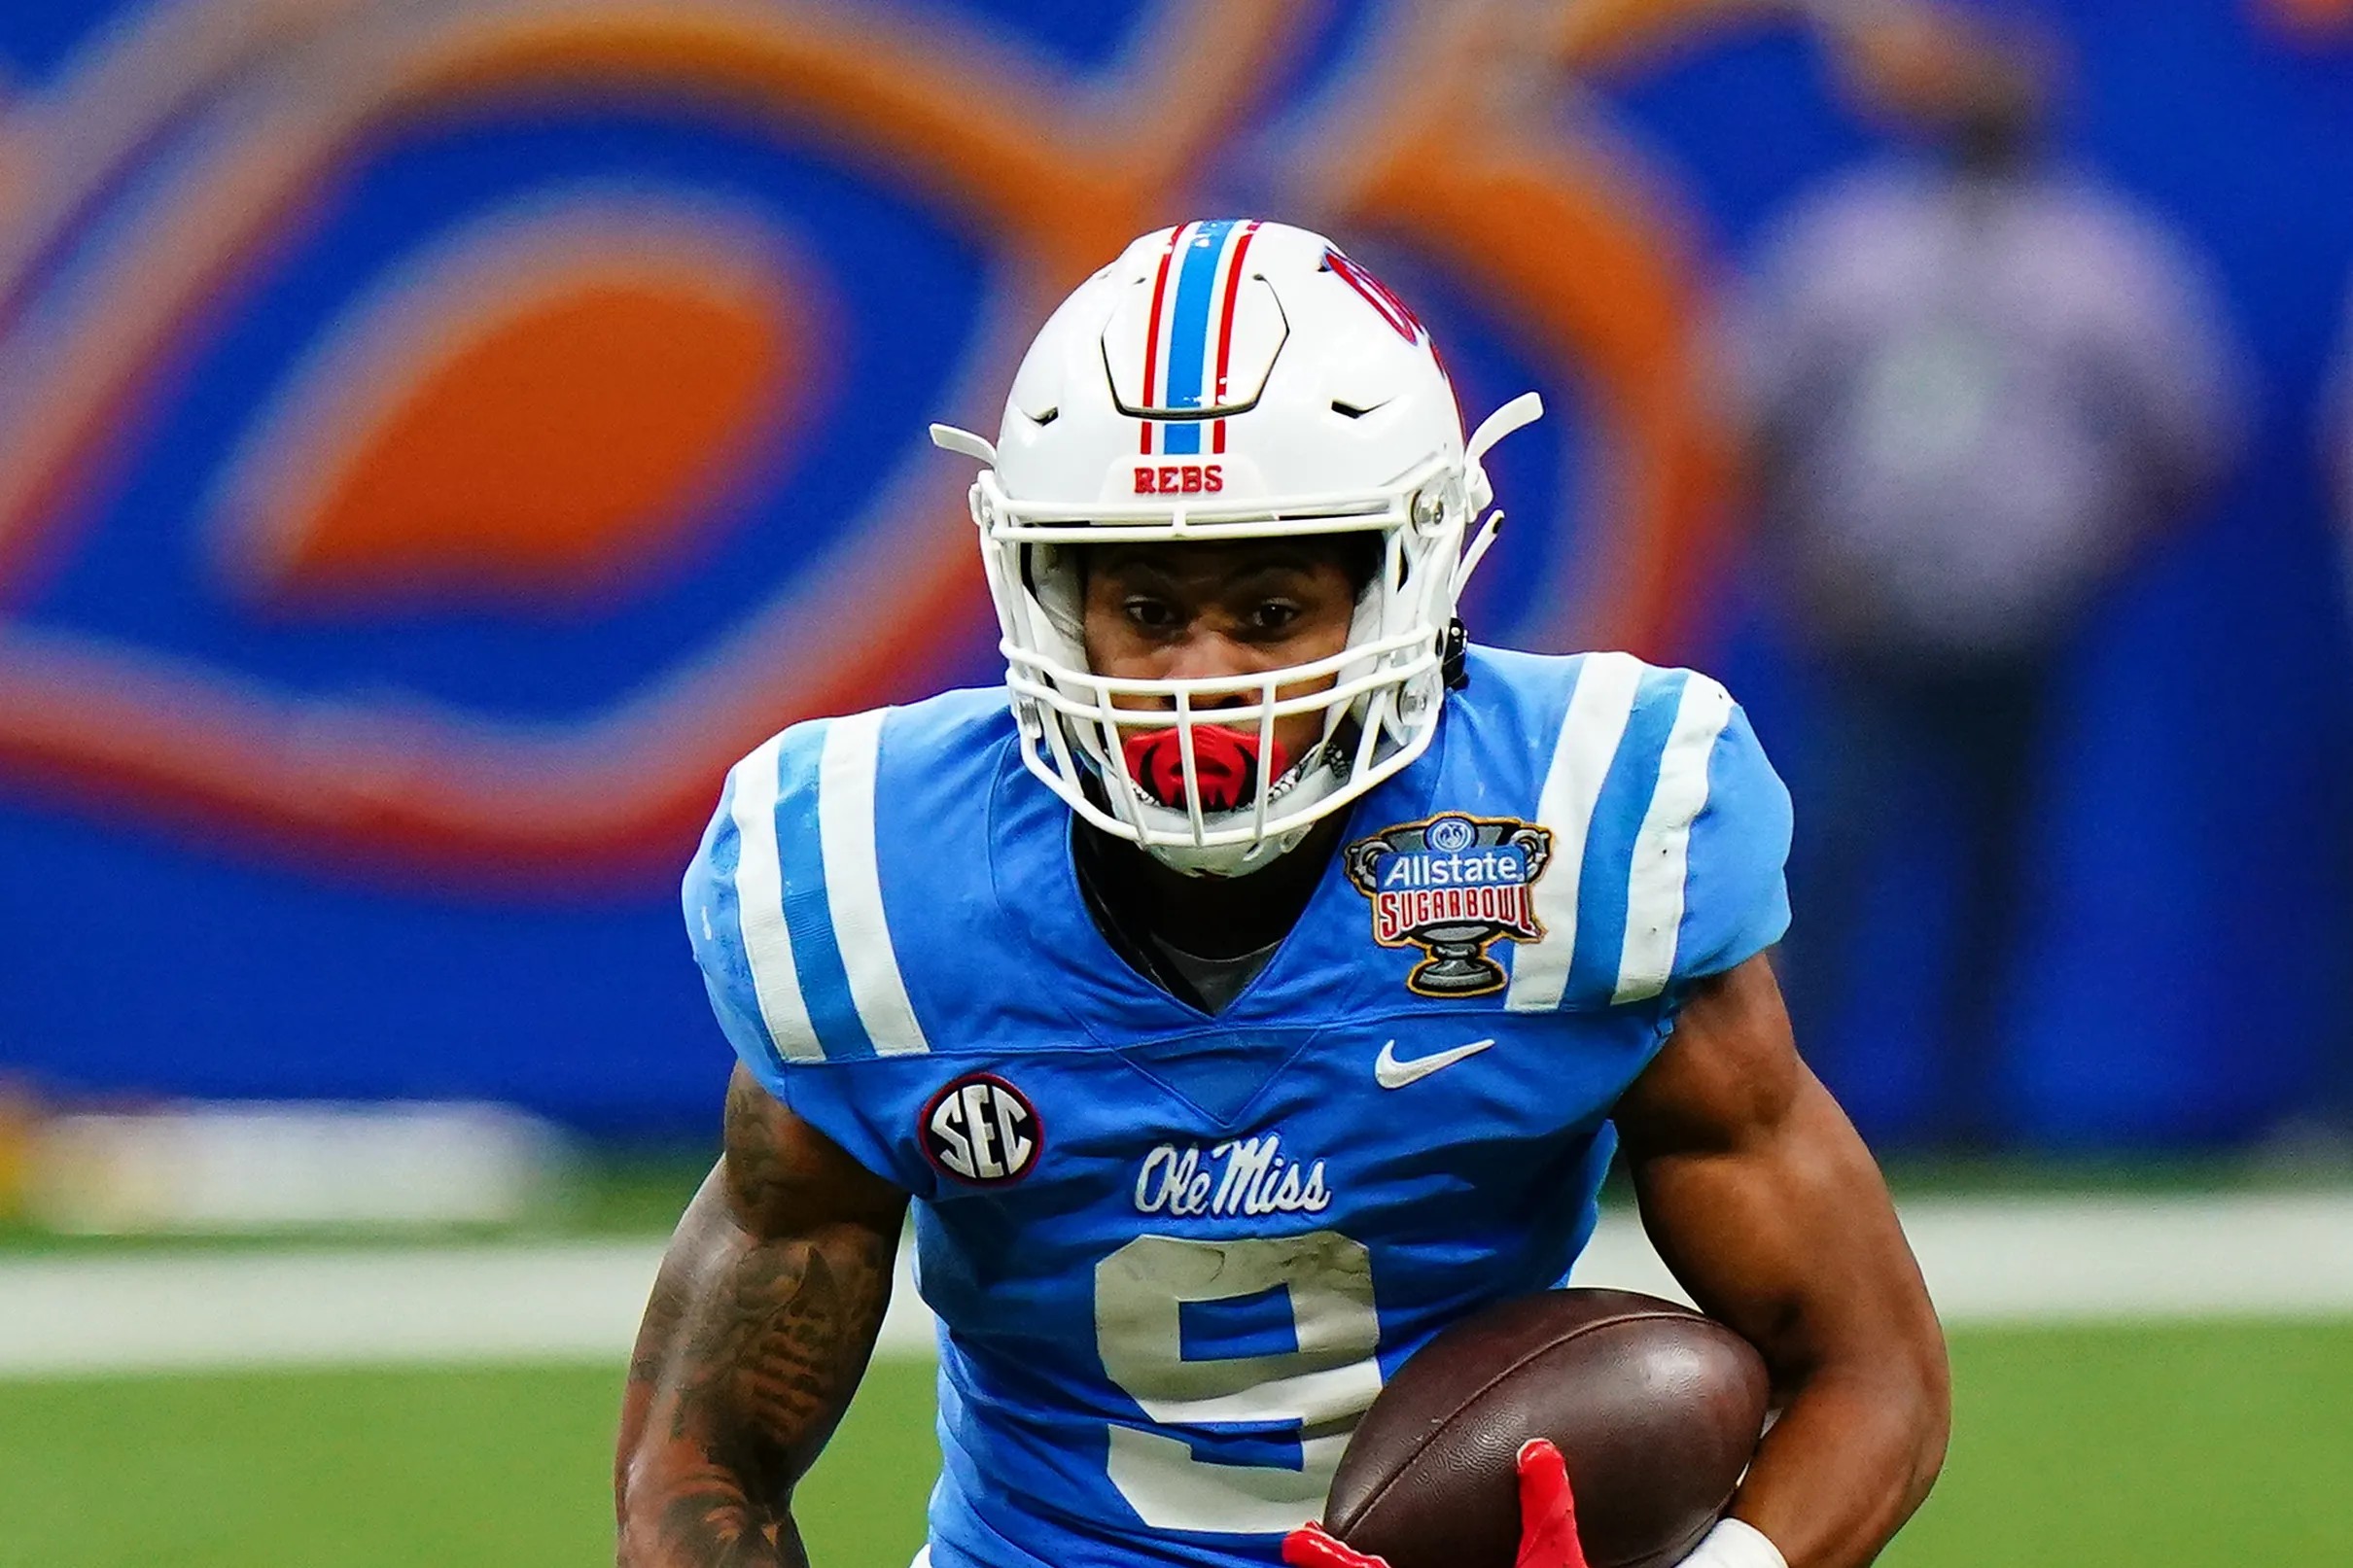 Chiefs UDFA running back Jerrion Ealy brings special team potential